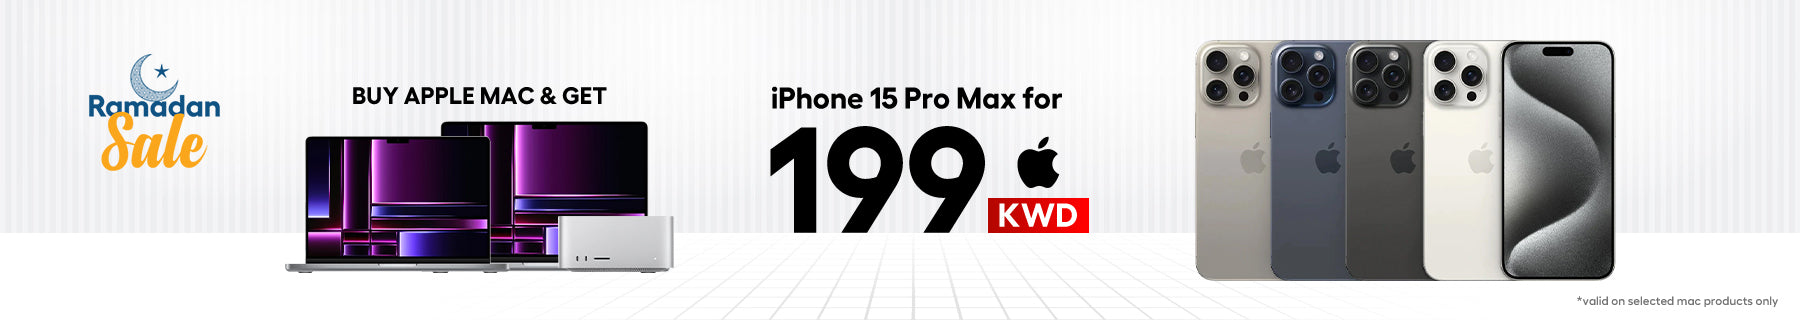 iPhone 15 Pro Max For 199 KWD